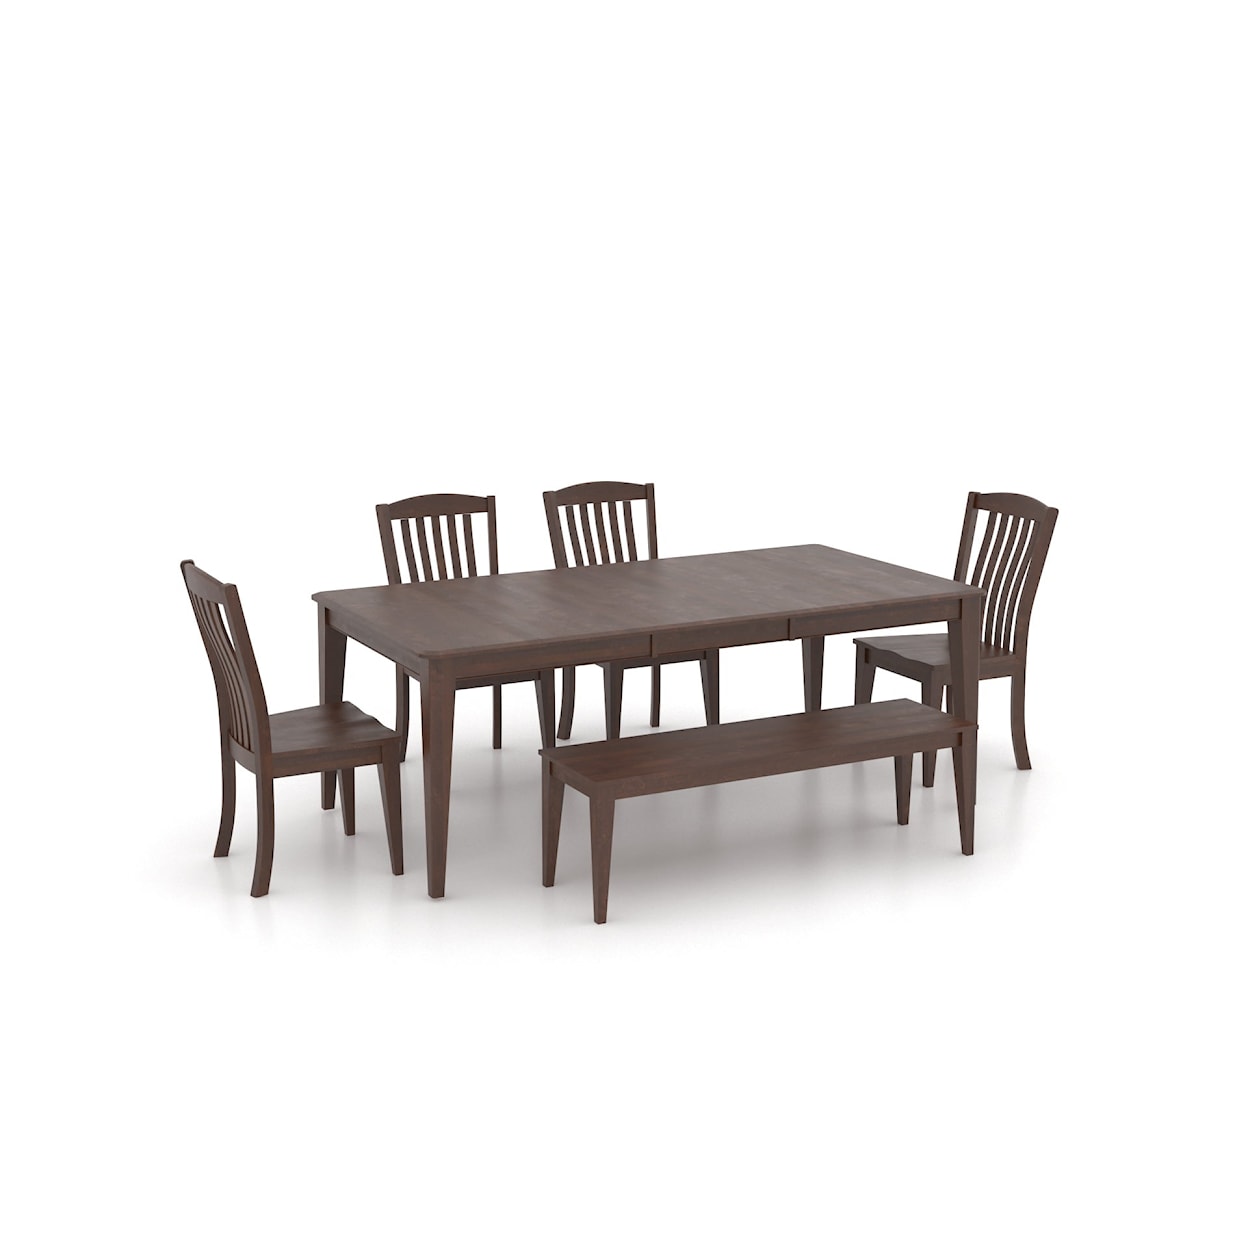 Canadel Gourmet 6 Pc Dining Set